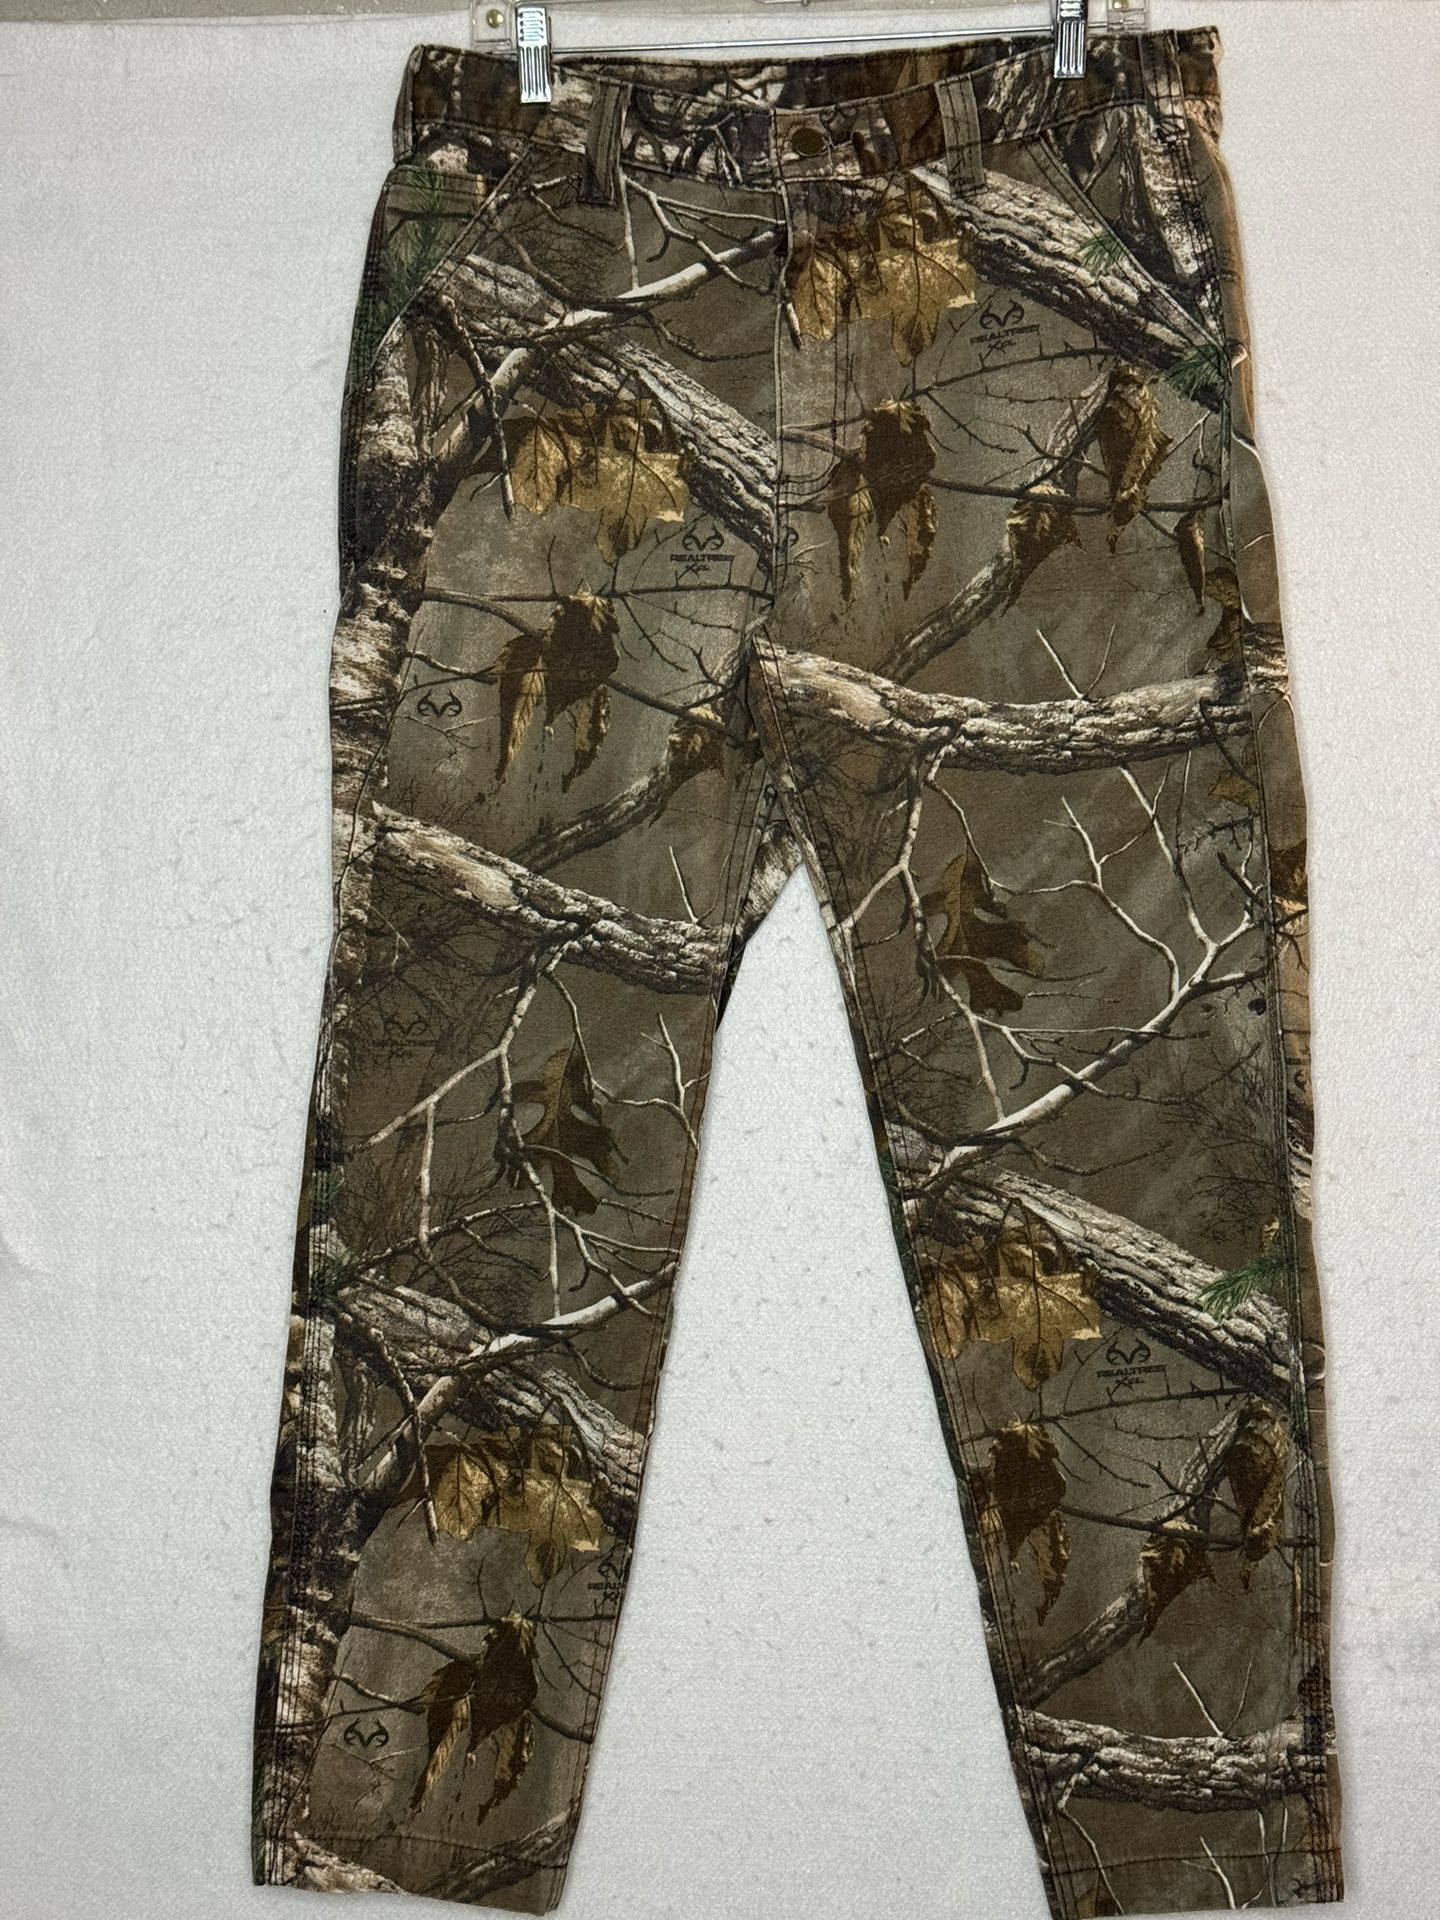 Carhartt Relaxed Fit Realtree Camo Utility Work Pants 102288-977 Mens Size 34x30